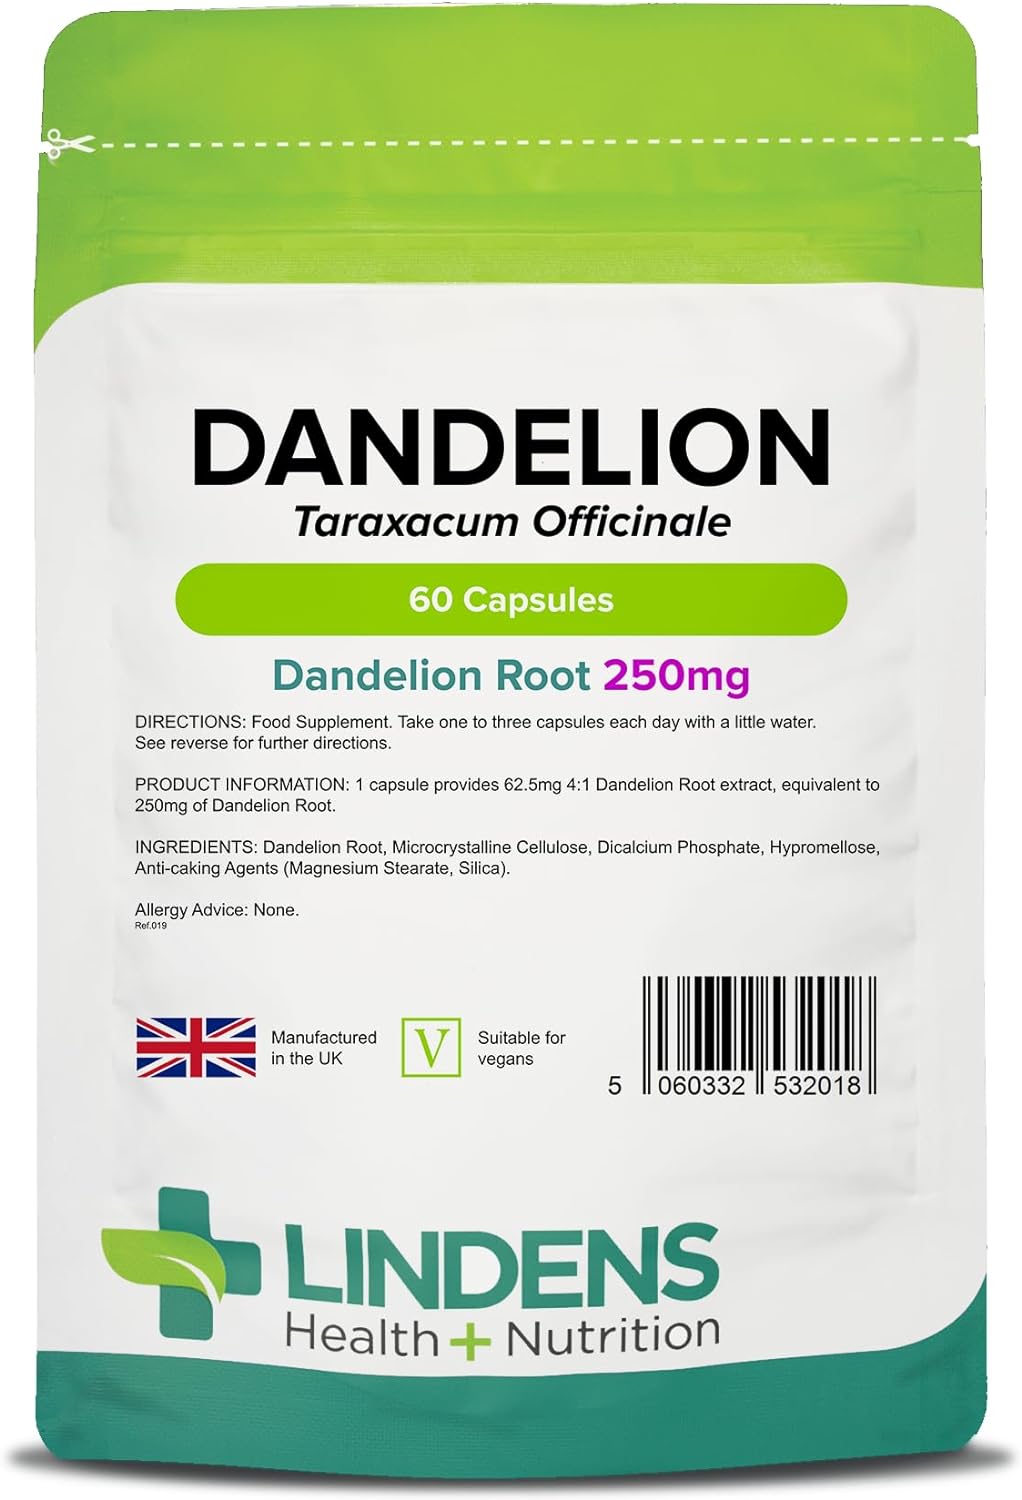 Lindens Dandelion 250mg - 60 Capsules - UK Made - Water Retention, Detox & Cleanse - Taraxacum Officinale - High Strength Root Extract - Traditional Herbal Supplement - GMP & Letterbox Friendly